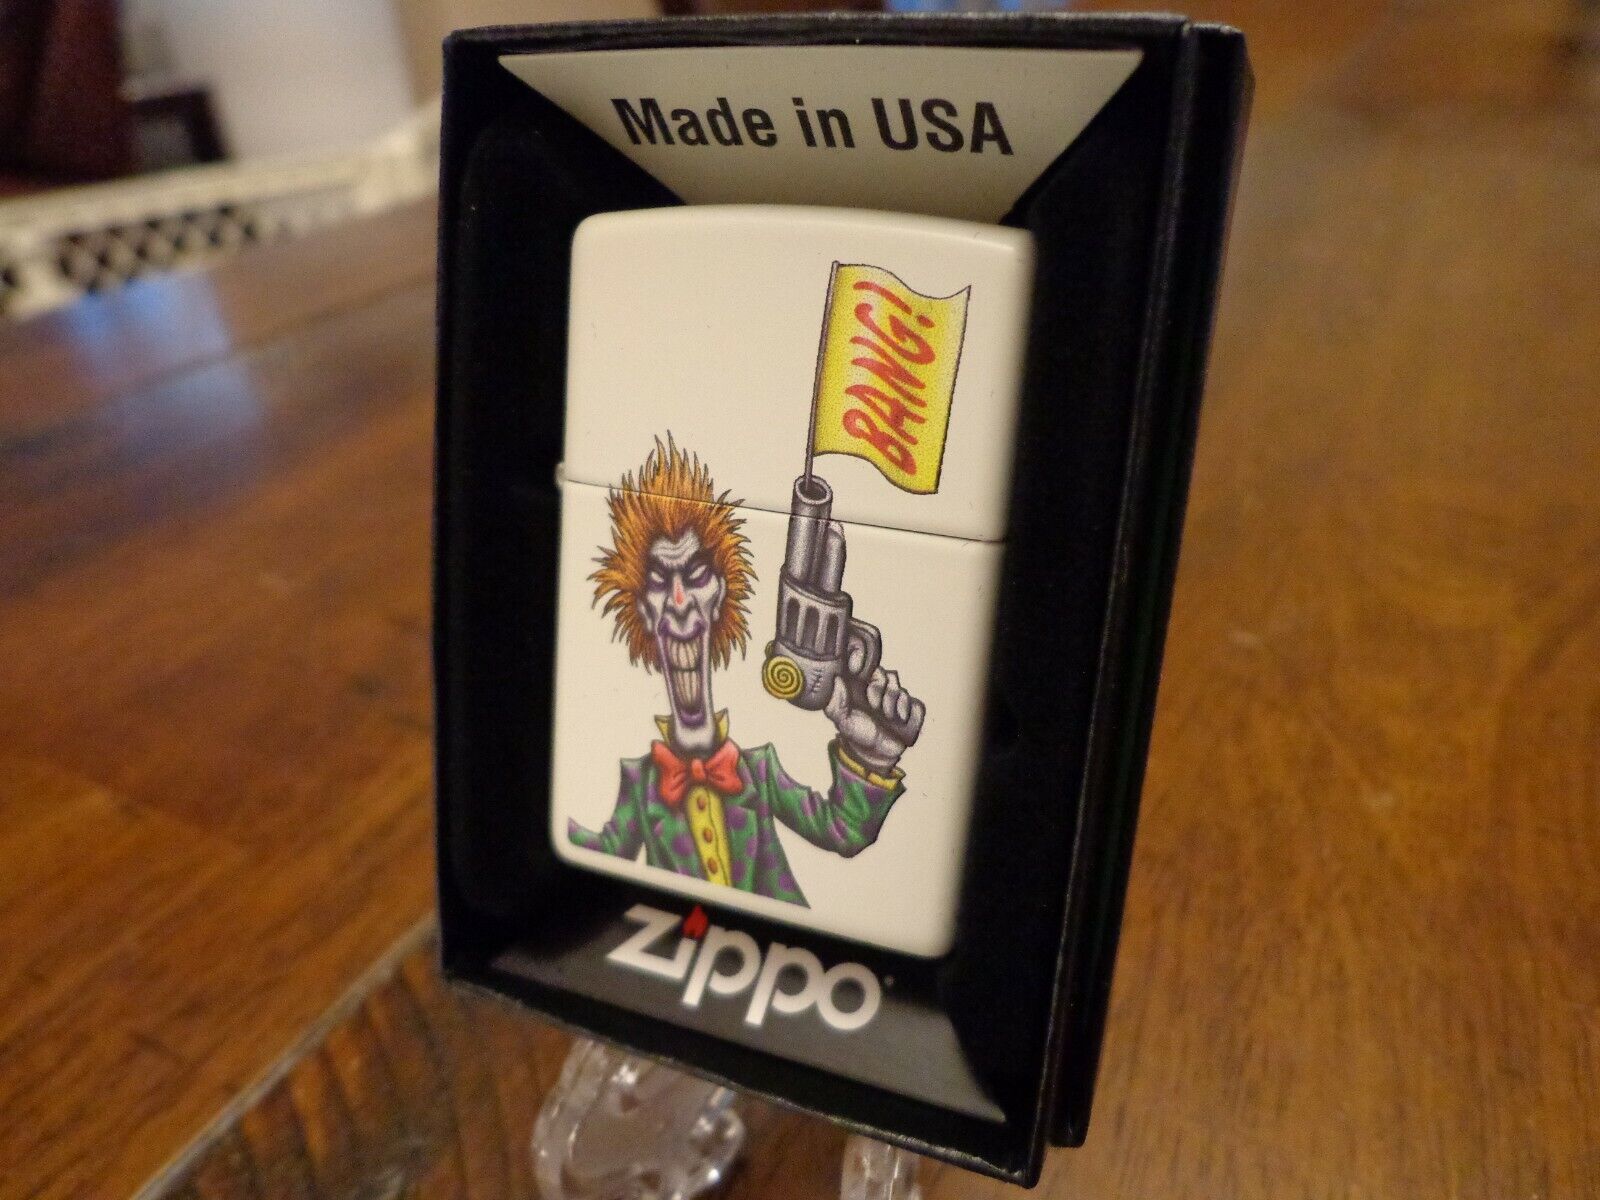 SCARY CLOWN PISTOL BANG CARTOON GUN ZIPPO LIGHTER MINT IN BOX. Available Now for 29.95